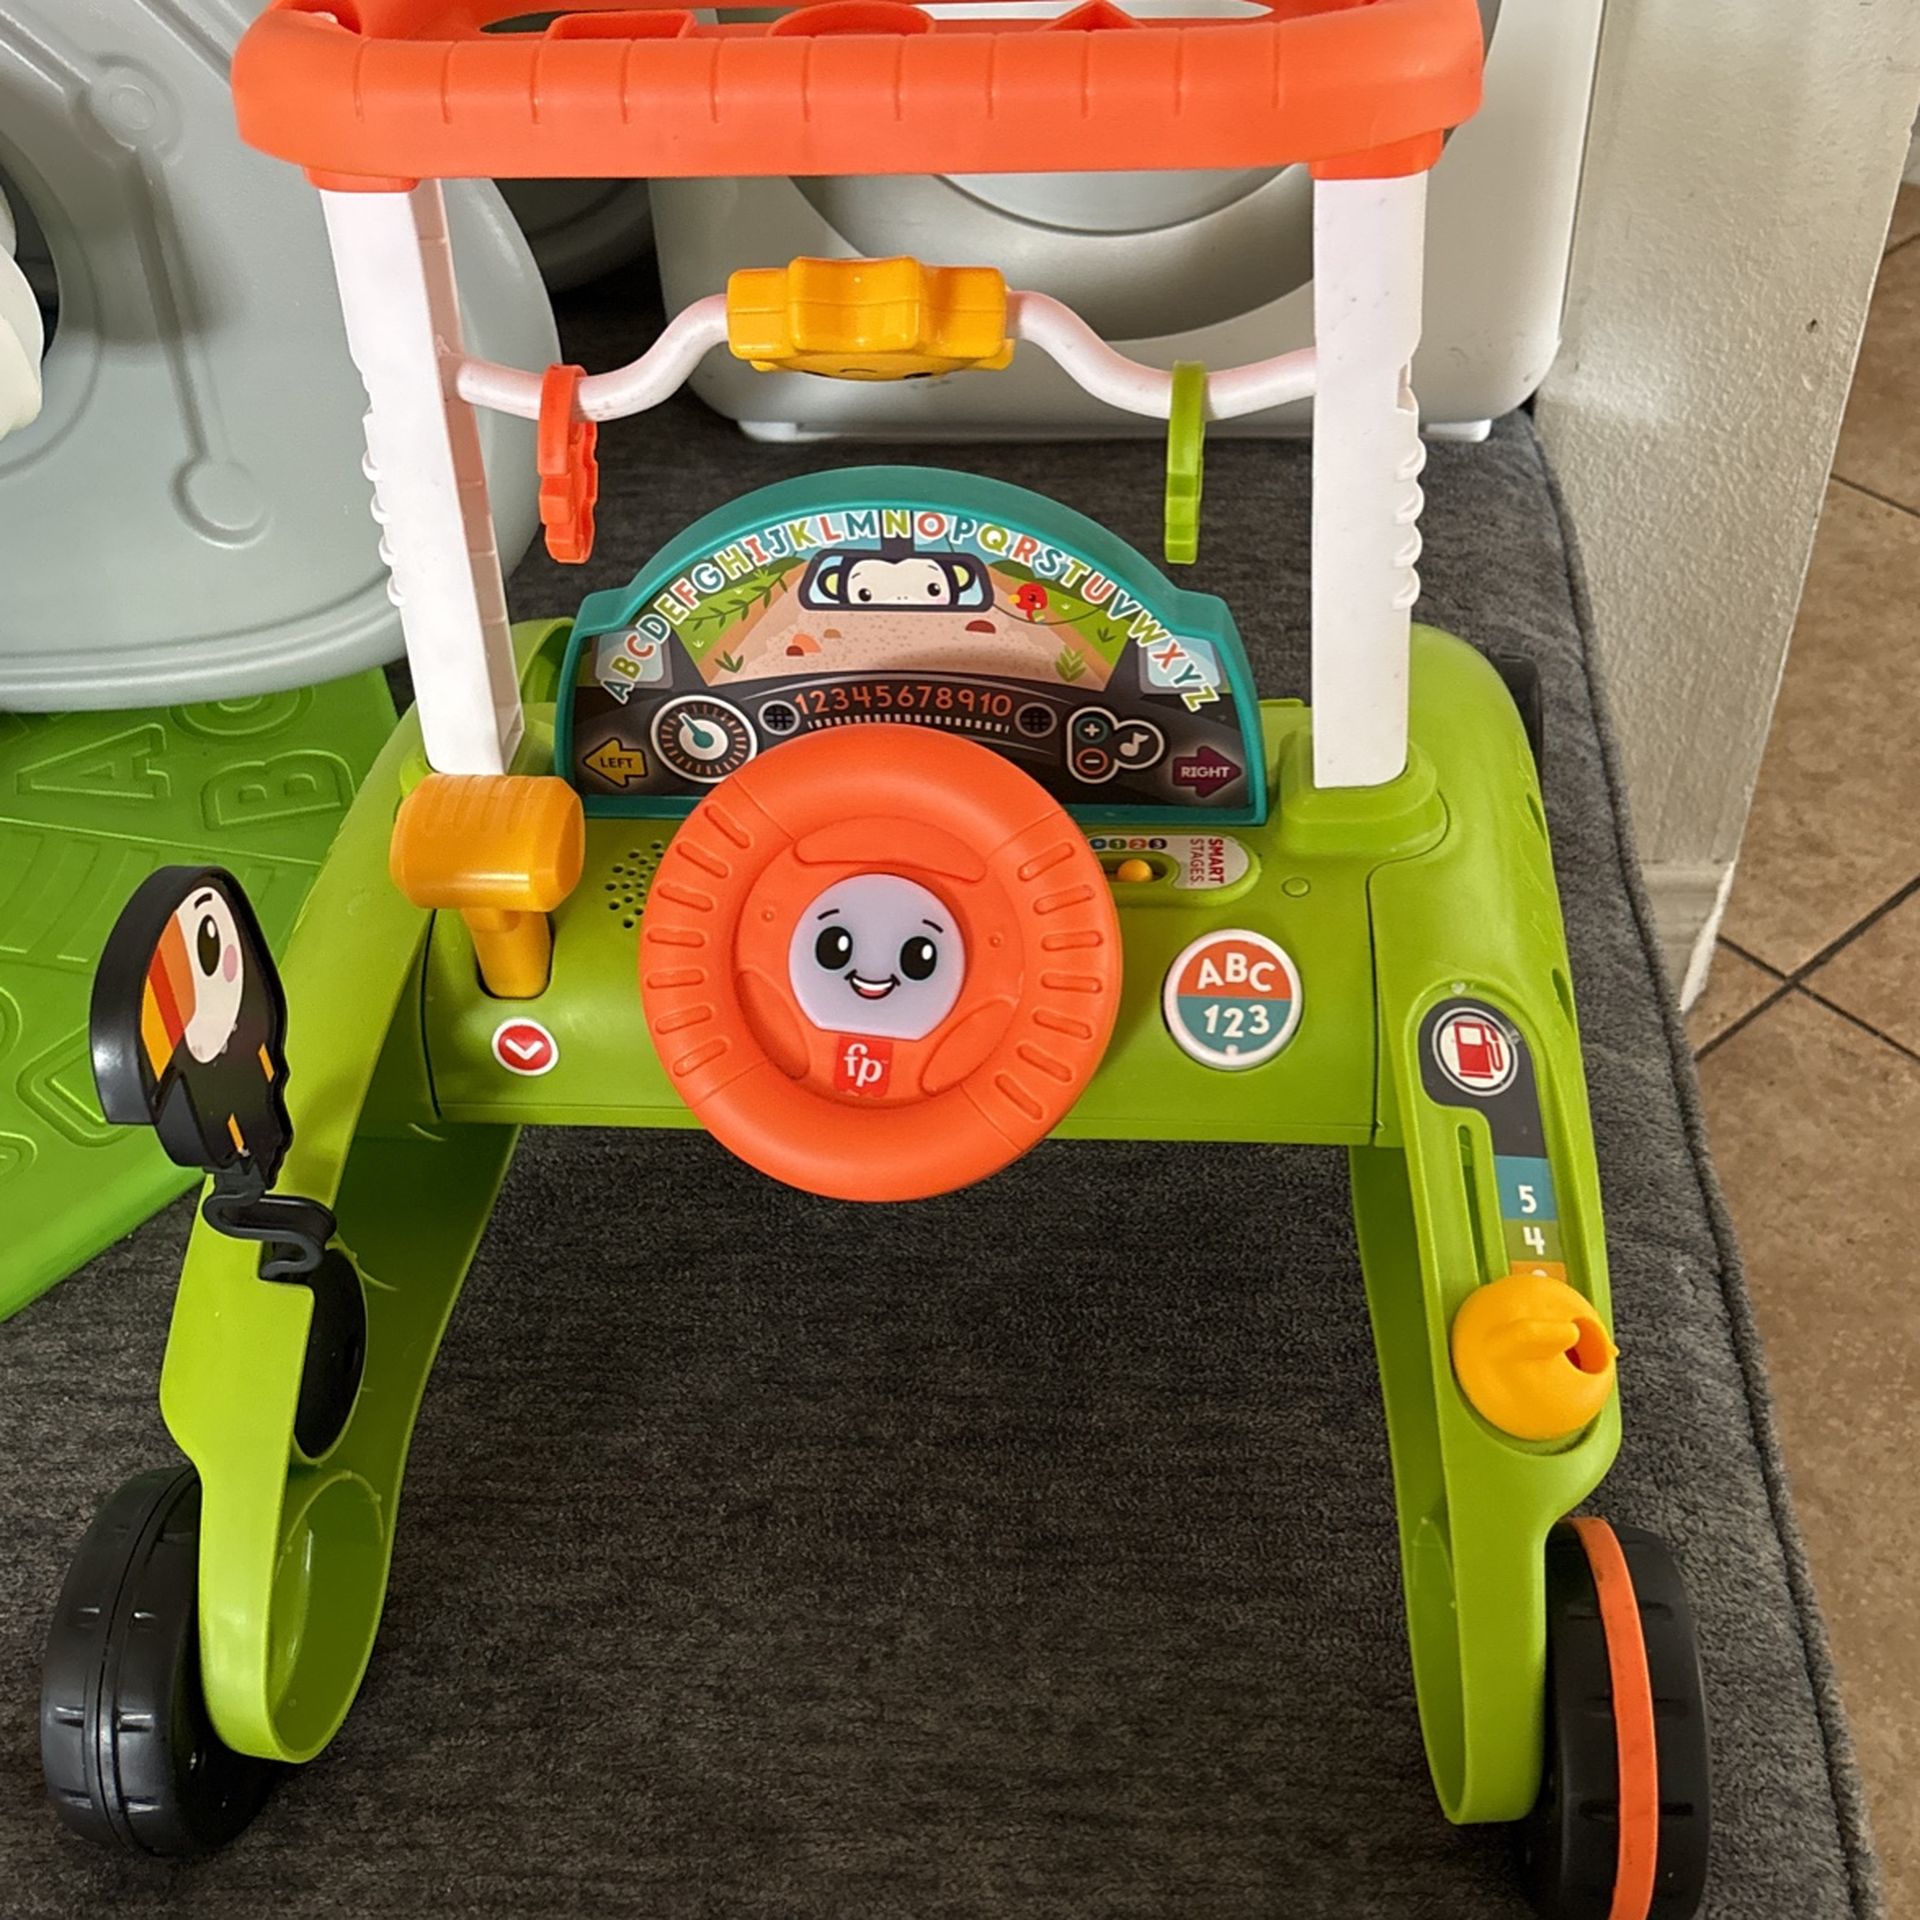 Fisher-Price 2-Sided Steady Speed Tiger Walker Electronic Learning Toy for Infant & Toddler